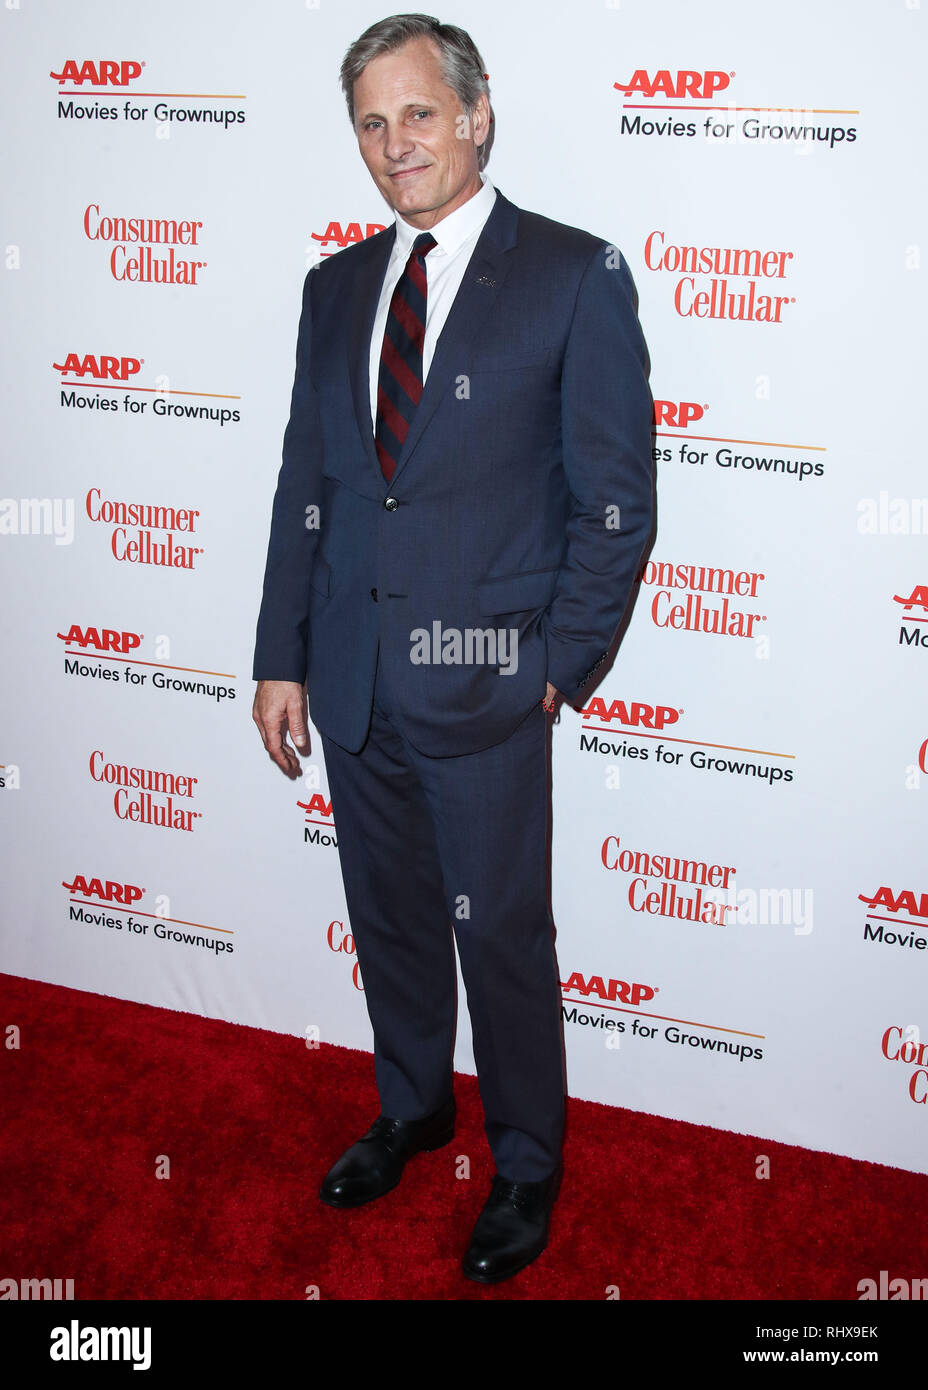 BEVERLY HILLS, LOS ANGELES, CA, USA - FEBRUARY 04: Actor Viggo Mortensen arrives at the AARP The Magazine's 18th Annual Movies for Grownups Awards held at the Beverly Wilshire Four Seasons Hotel on February 4, 2019 in Beverly Hills, Los Angeles, California, United States. (Photo by Xavier Collin/Image Press Agency) Stock Photo